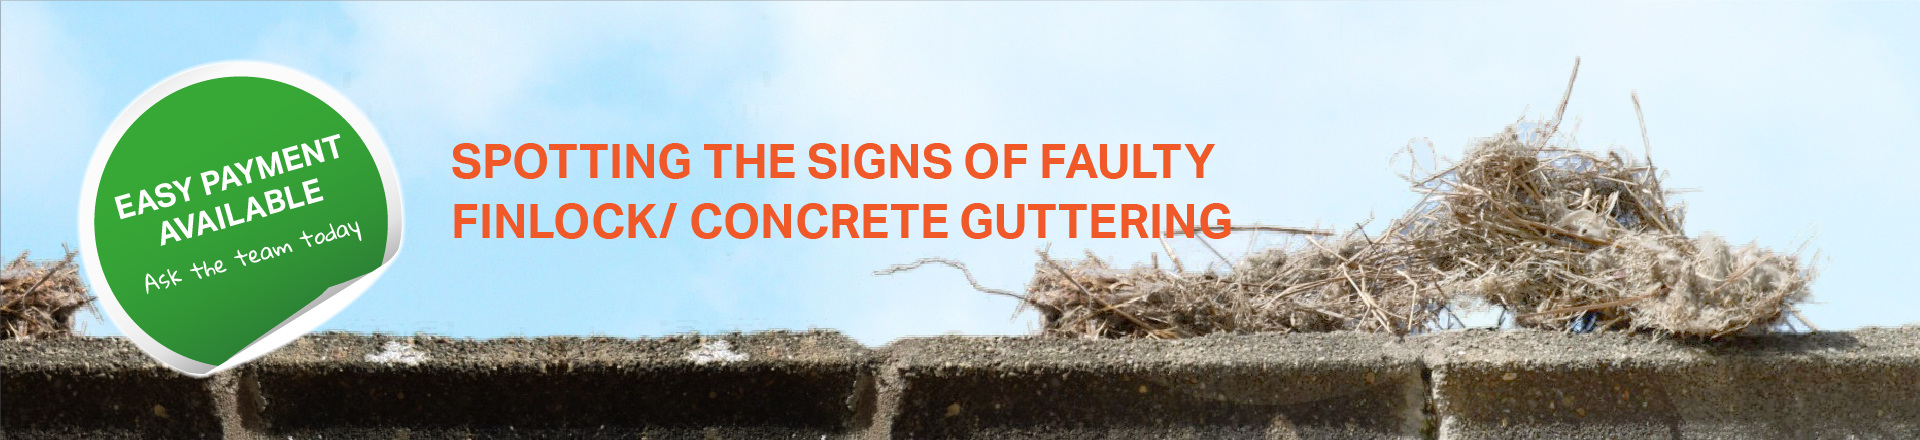 Damaged and Leaking Gutters - Spotting the signs of faulty finlock / concrete guttering.